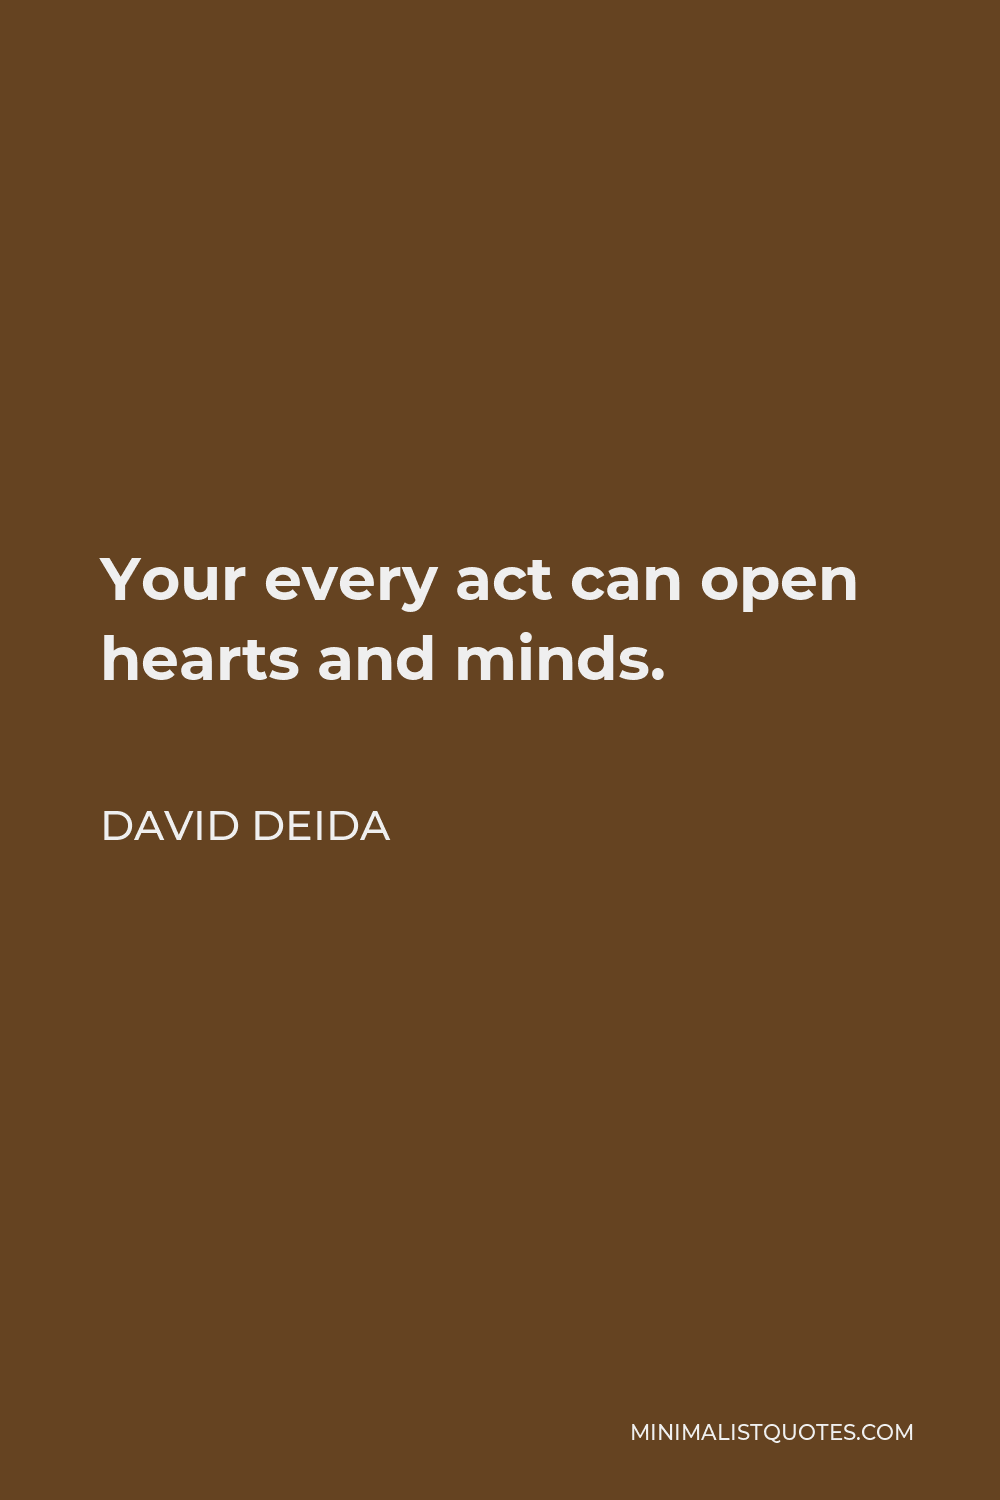 David Deida Quote - Your every act can open hearts and minds.